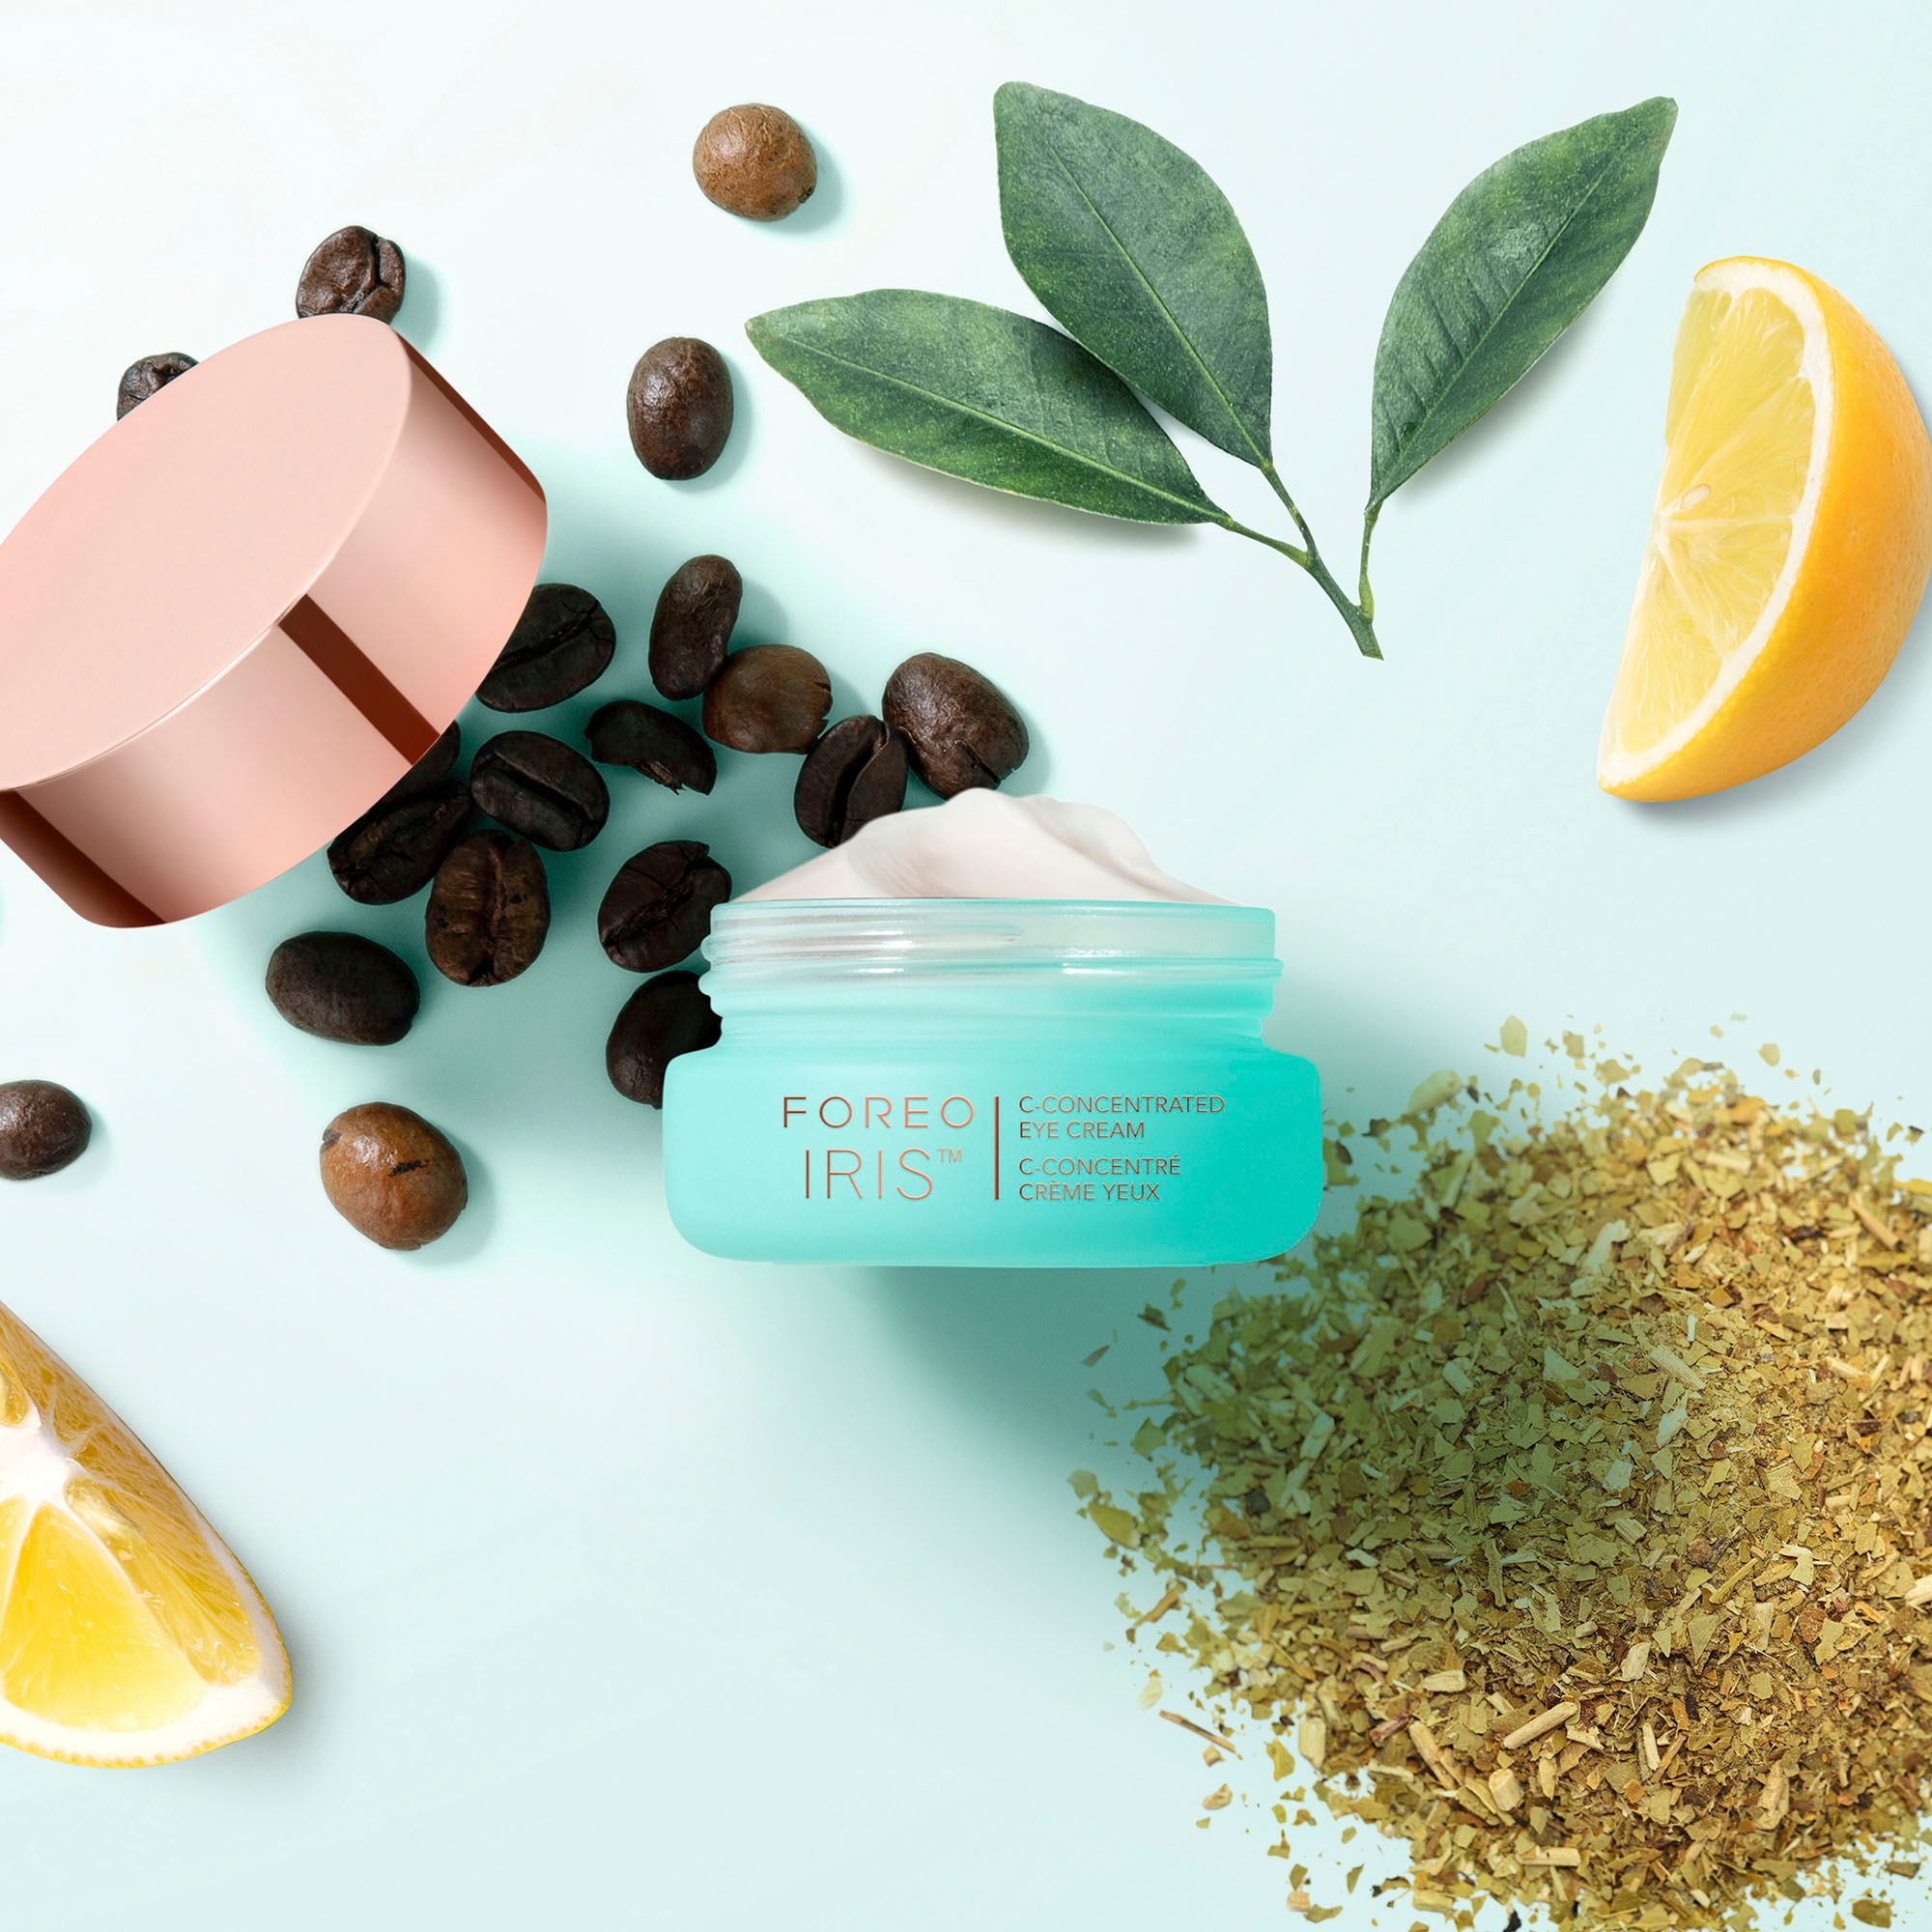 »IRIS™ ml« CREAM bei C-CONCENTRATED EYE Augencreme OTTOversand 15 FOREO